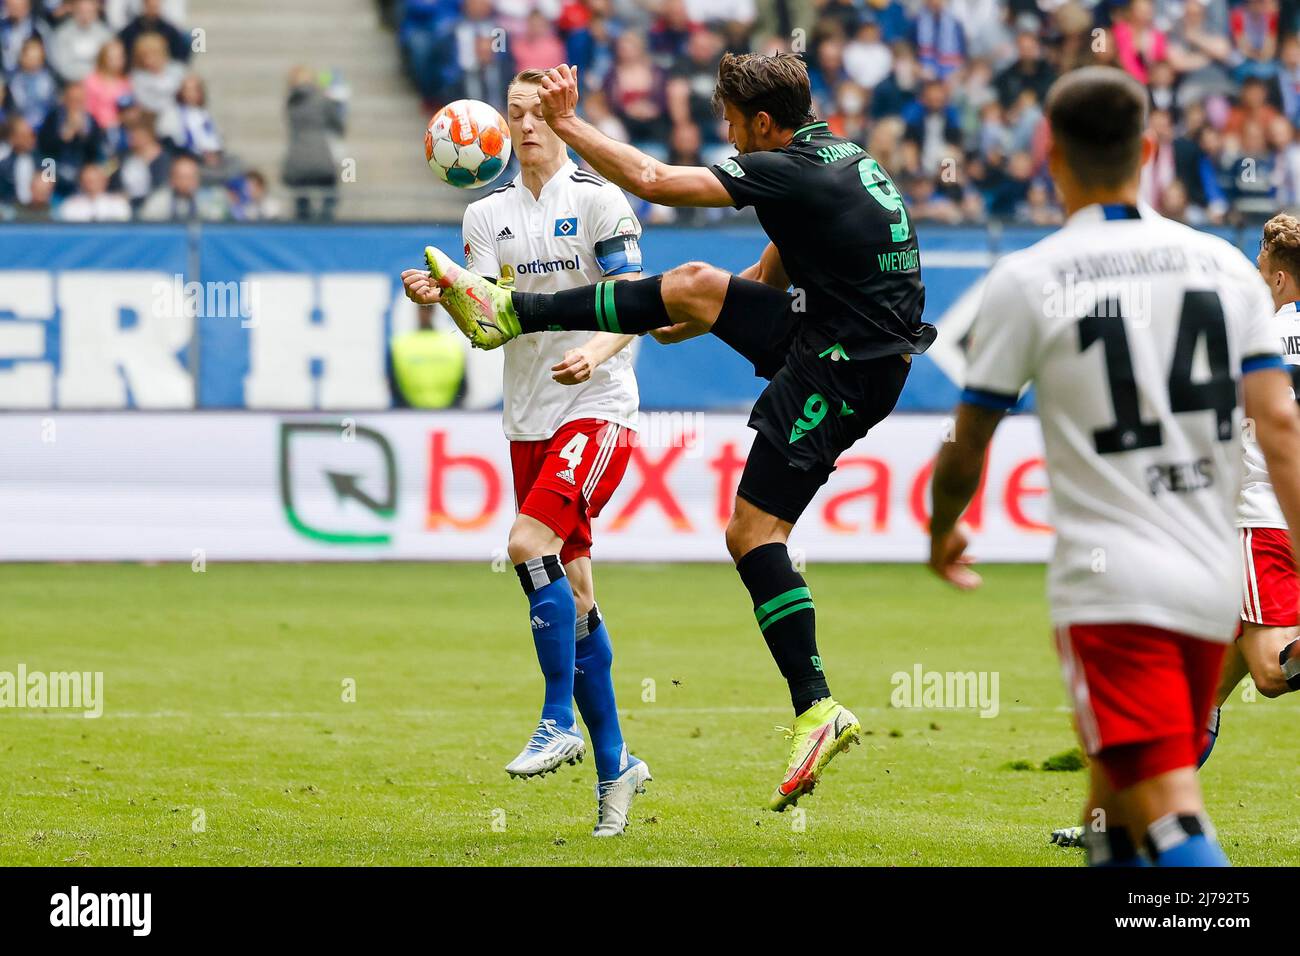 07 May 2022, Hamburg: Soccer: 2nd Bundesliga, Hamburger SV - Hannover 96, Matchday 33, Volksparkstadion. Hamburg's Sebastian Schonlau (l) and Hannover's Hendrik Weydandt fight for the ball. Photo: Frank Molter/dpa - IMPORTANT NOTE: In accordance with the requirements of the DFL Deutsche Fußball Liga and the DFB Deutscher Fußball-Bund, it is prohibited to use or have used photographs taken in the stadium and/or of the match in the form of sequence pictures and/or video-like photo series. Stock Photo